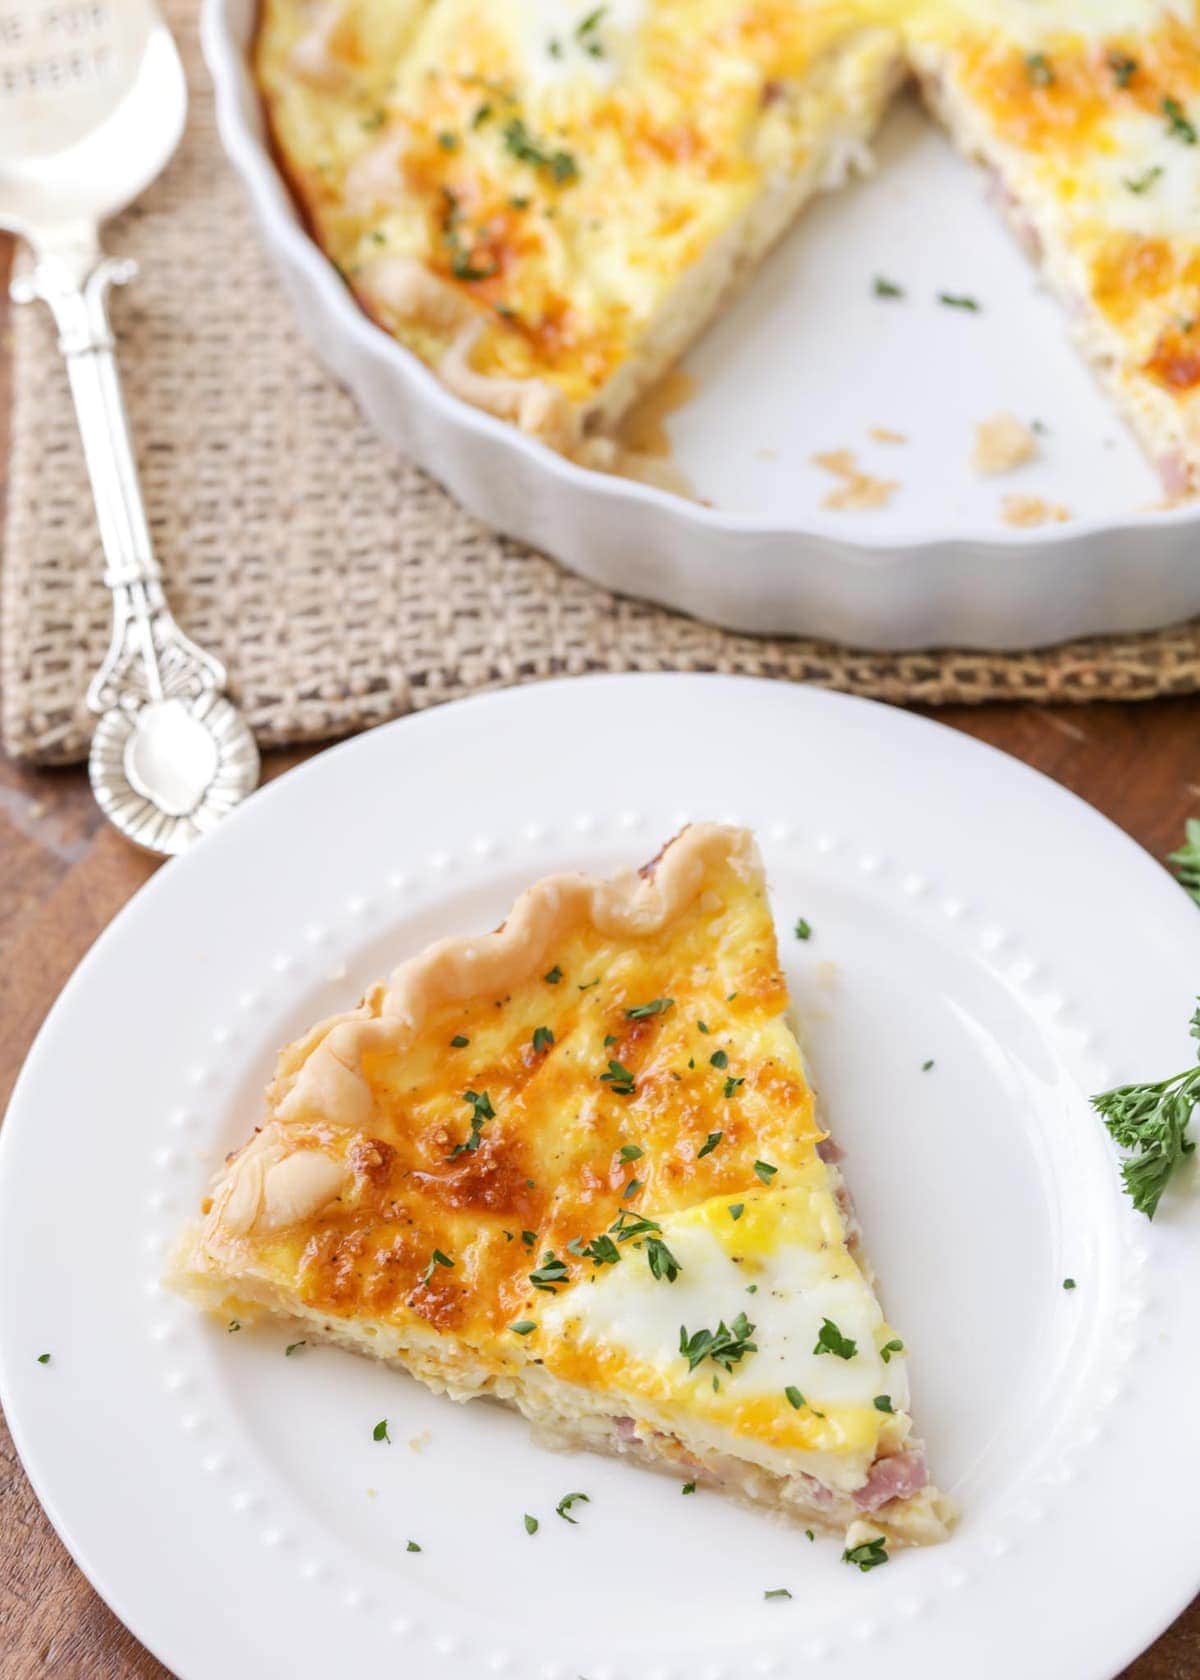 Ham and cheese quiche slice served on a white plate.